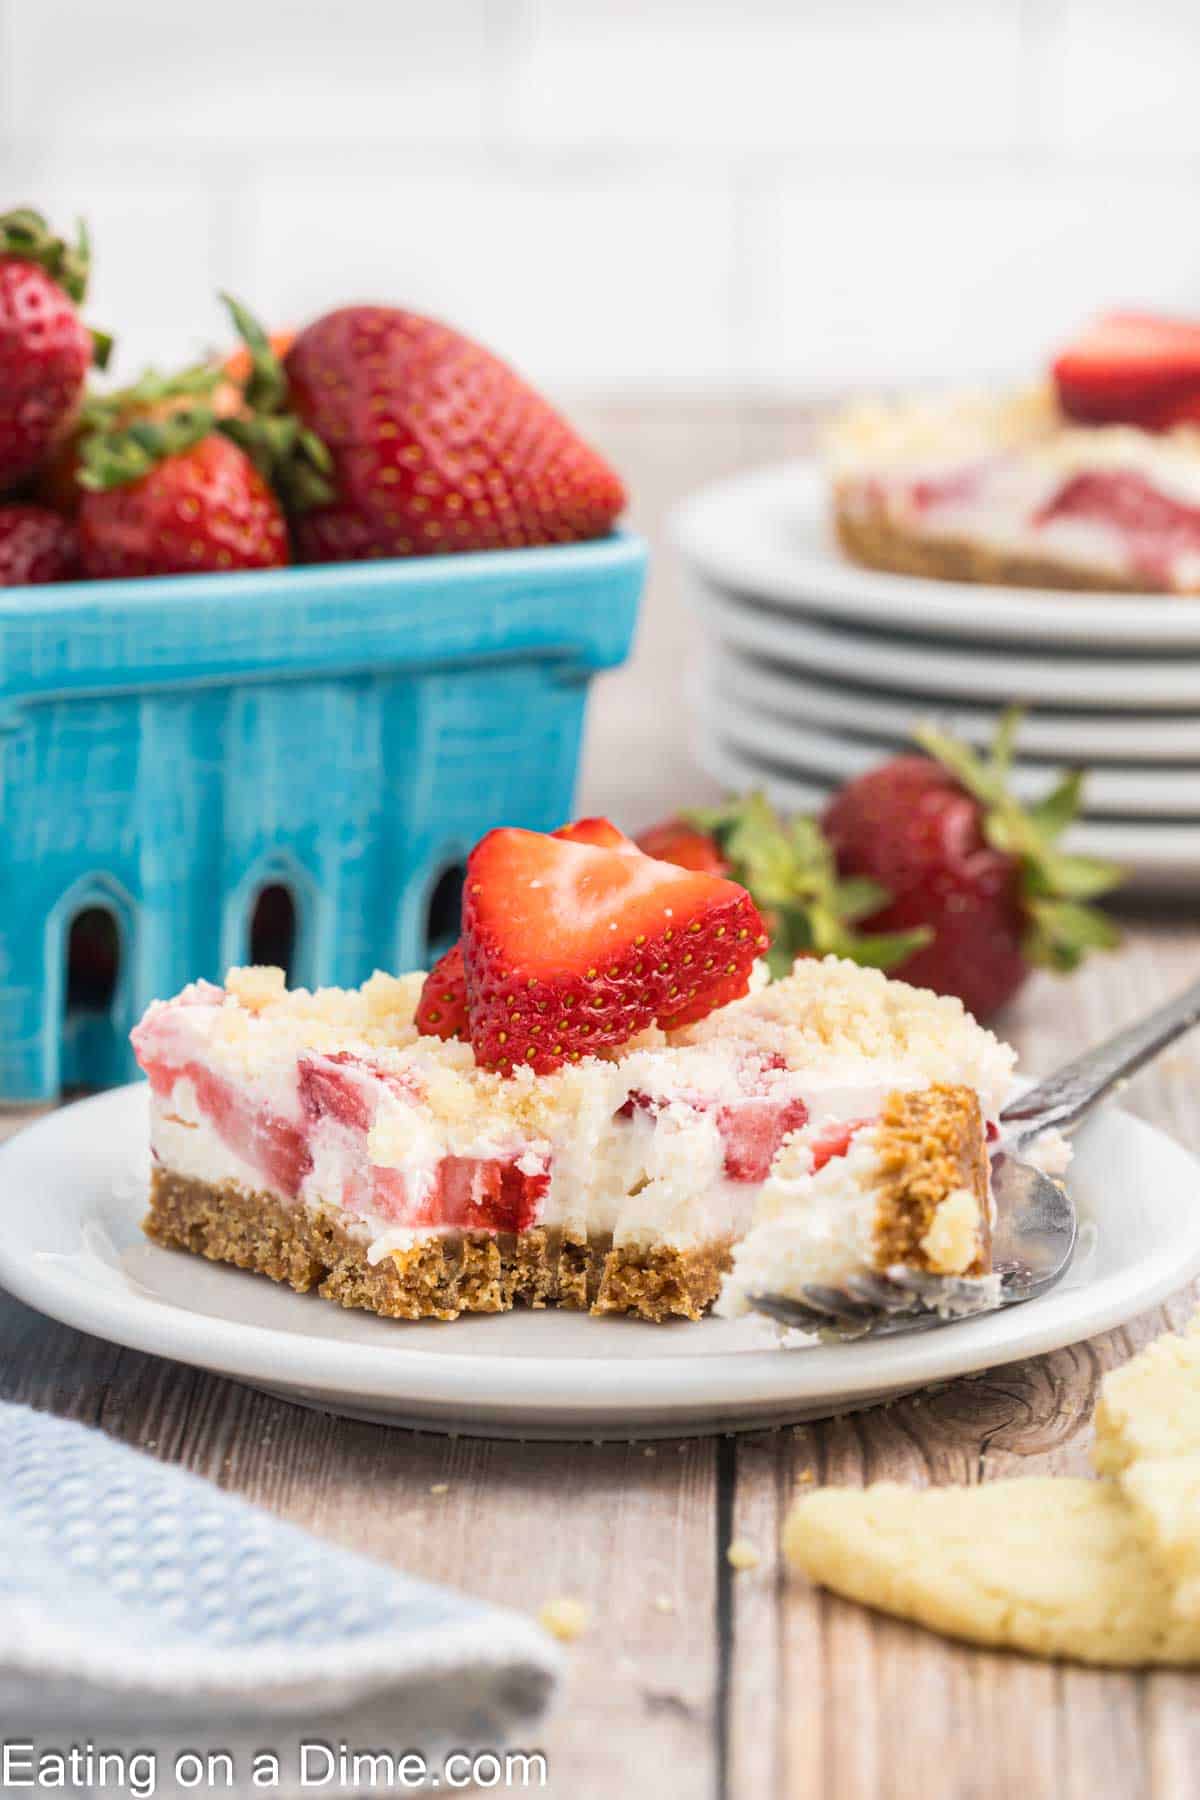 A close-up of a slice of strawberry cheesecake on a white plate with a fork. The cheesecake has a graham cracker crust and fresh strawberries on top, reminiscent of an indulgent strawberry crunch bars recipe. Behind the plate, there's a container of strawberries and a stack of plates with more cheesecake slices.